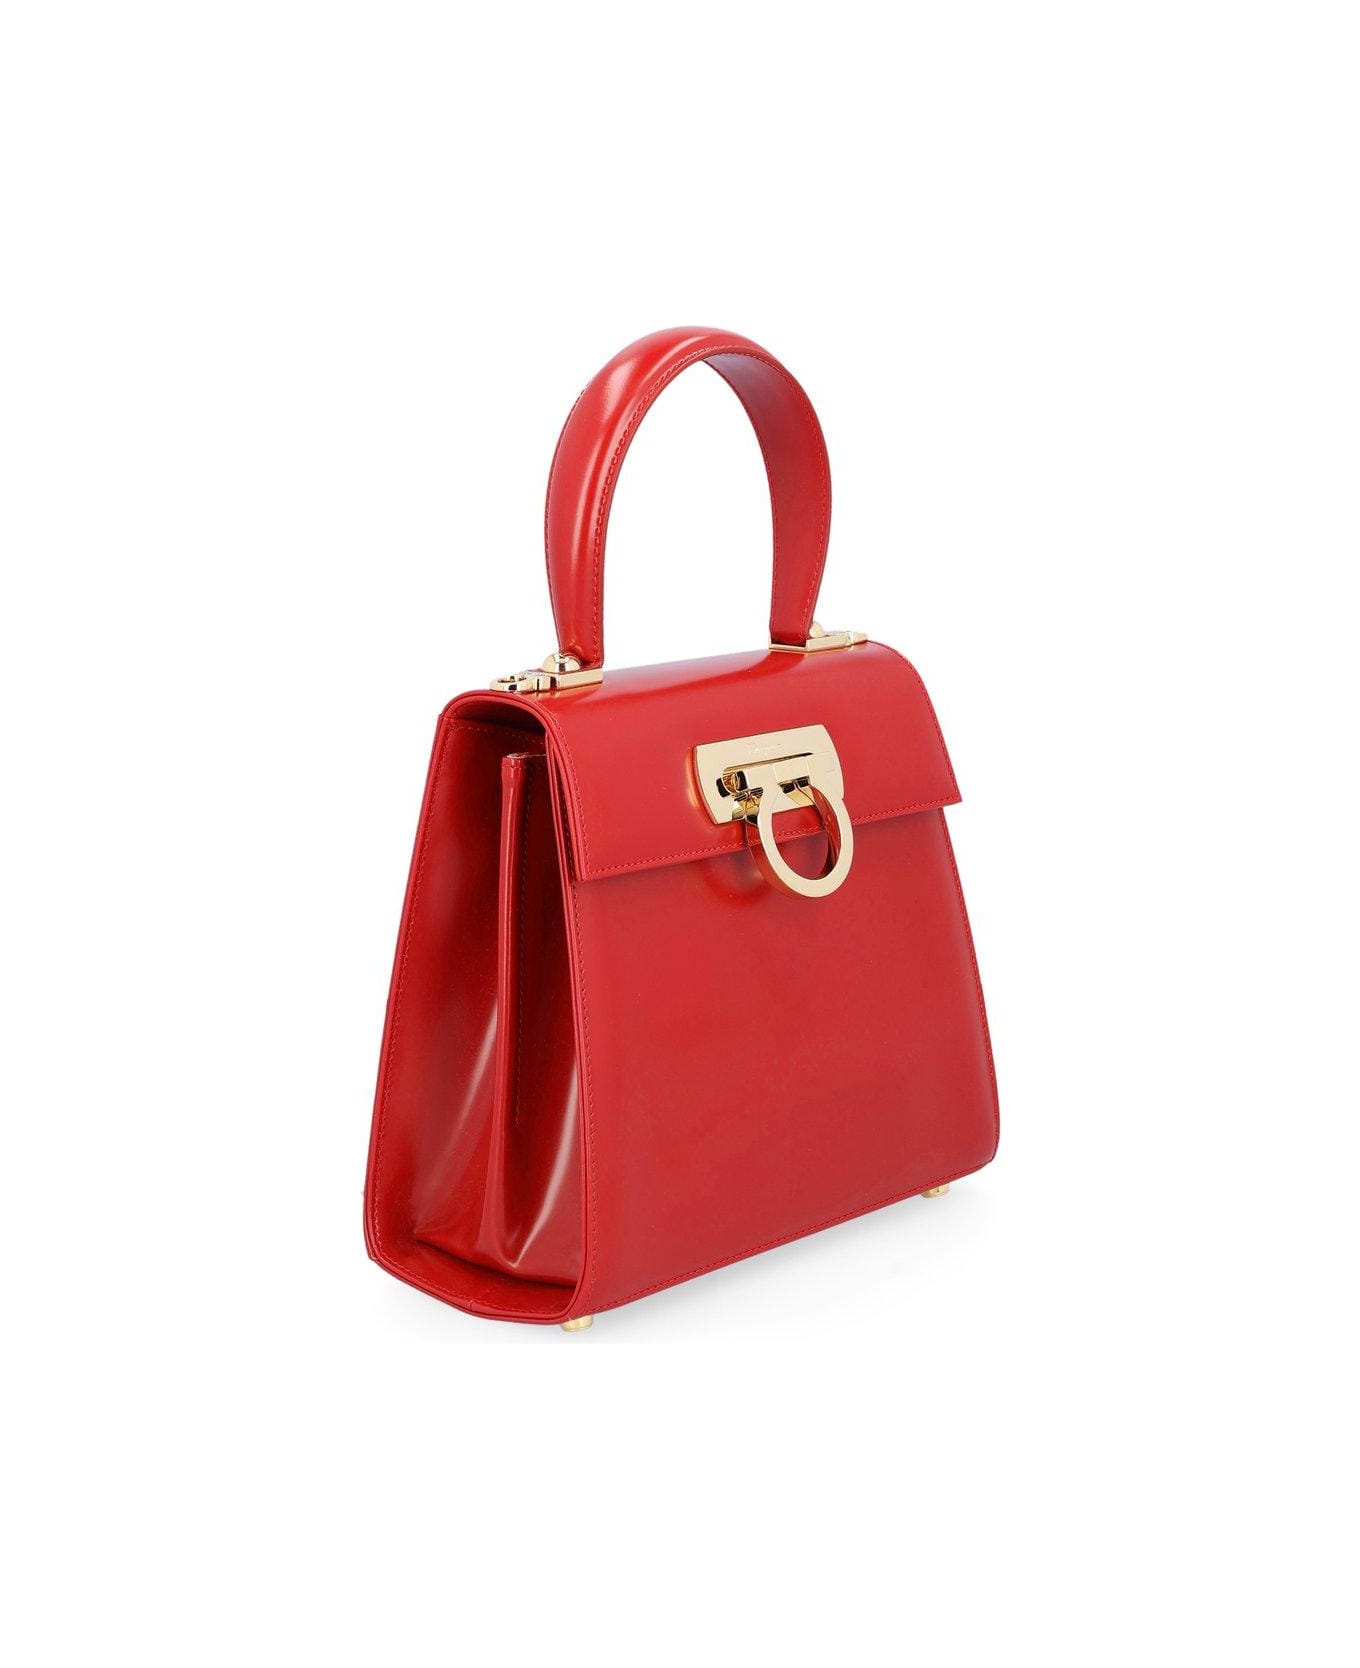 Ferragamo Iconic Small Top Handle Bags - Red